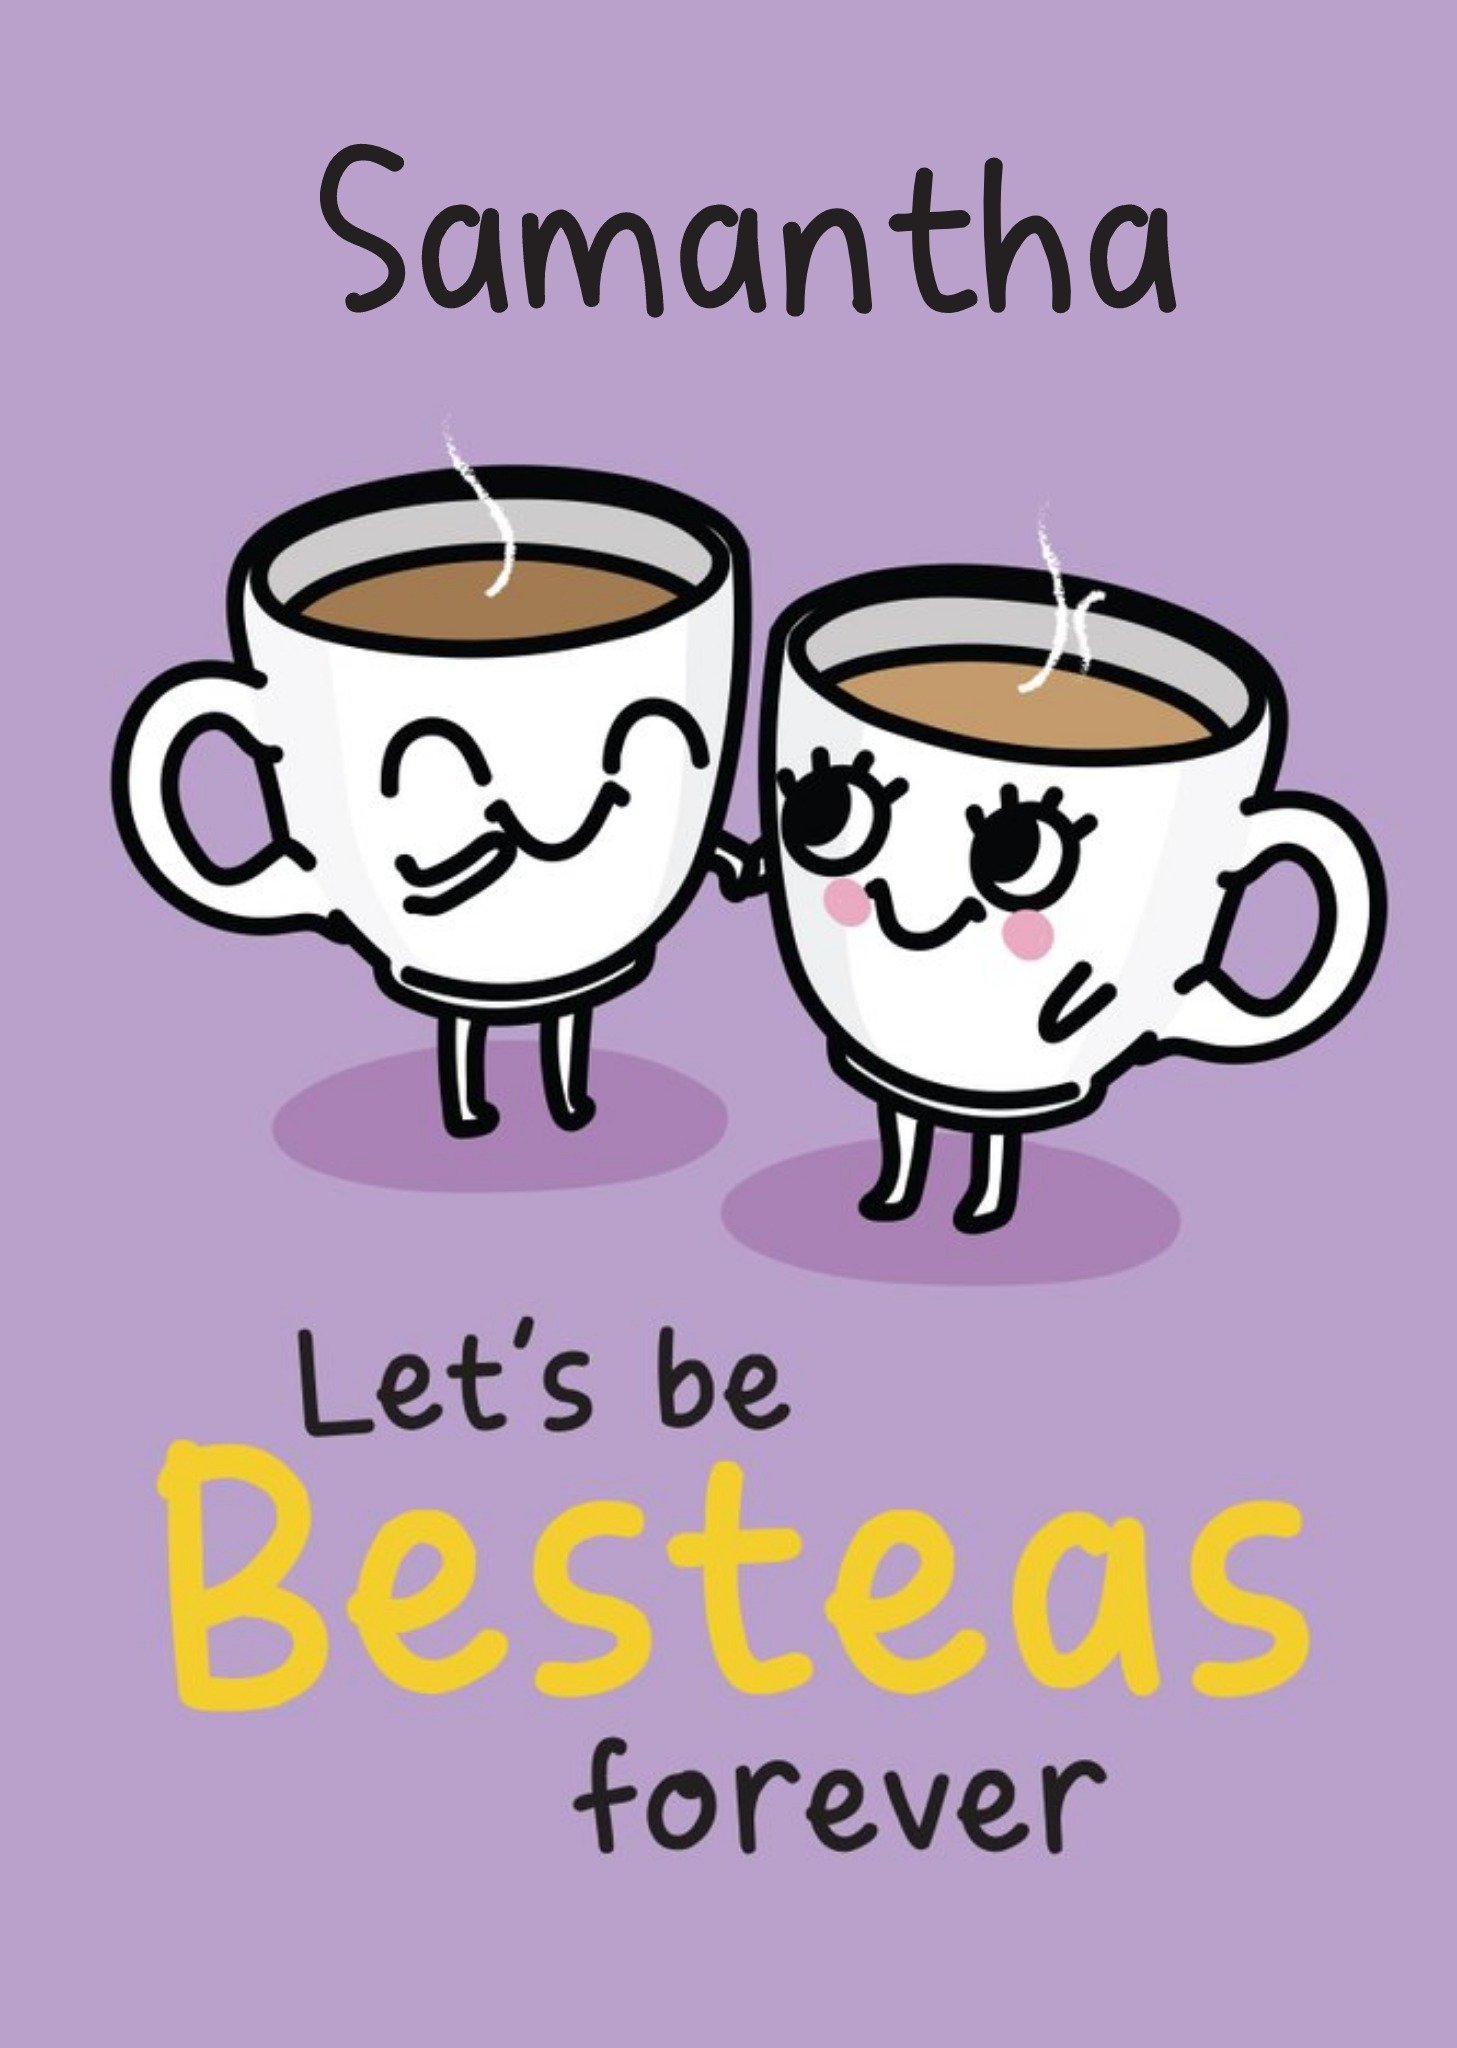 Moonpig Illustration Of Two Cups Of Tea. Let's Be Besteas Forever Birthday Card Ecard